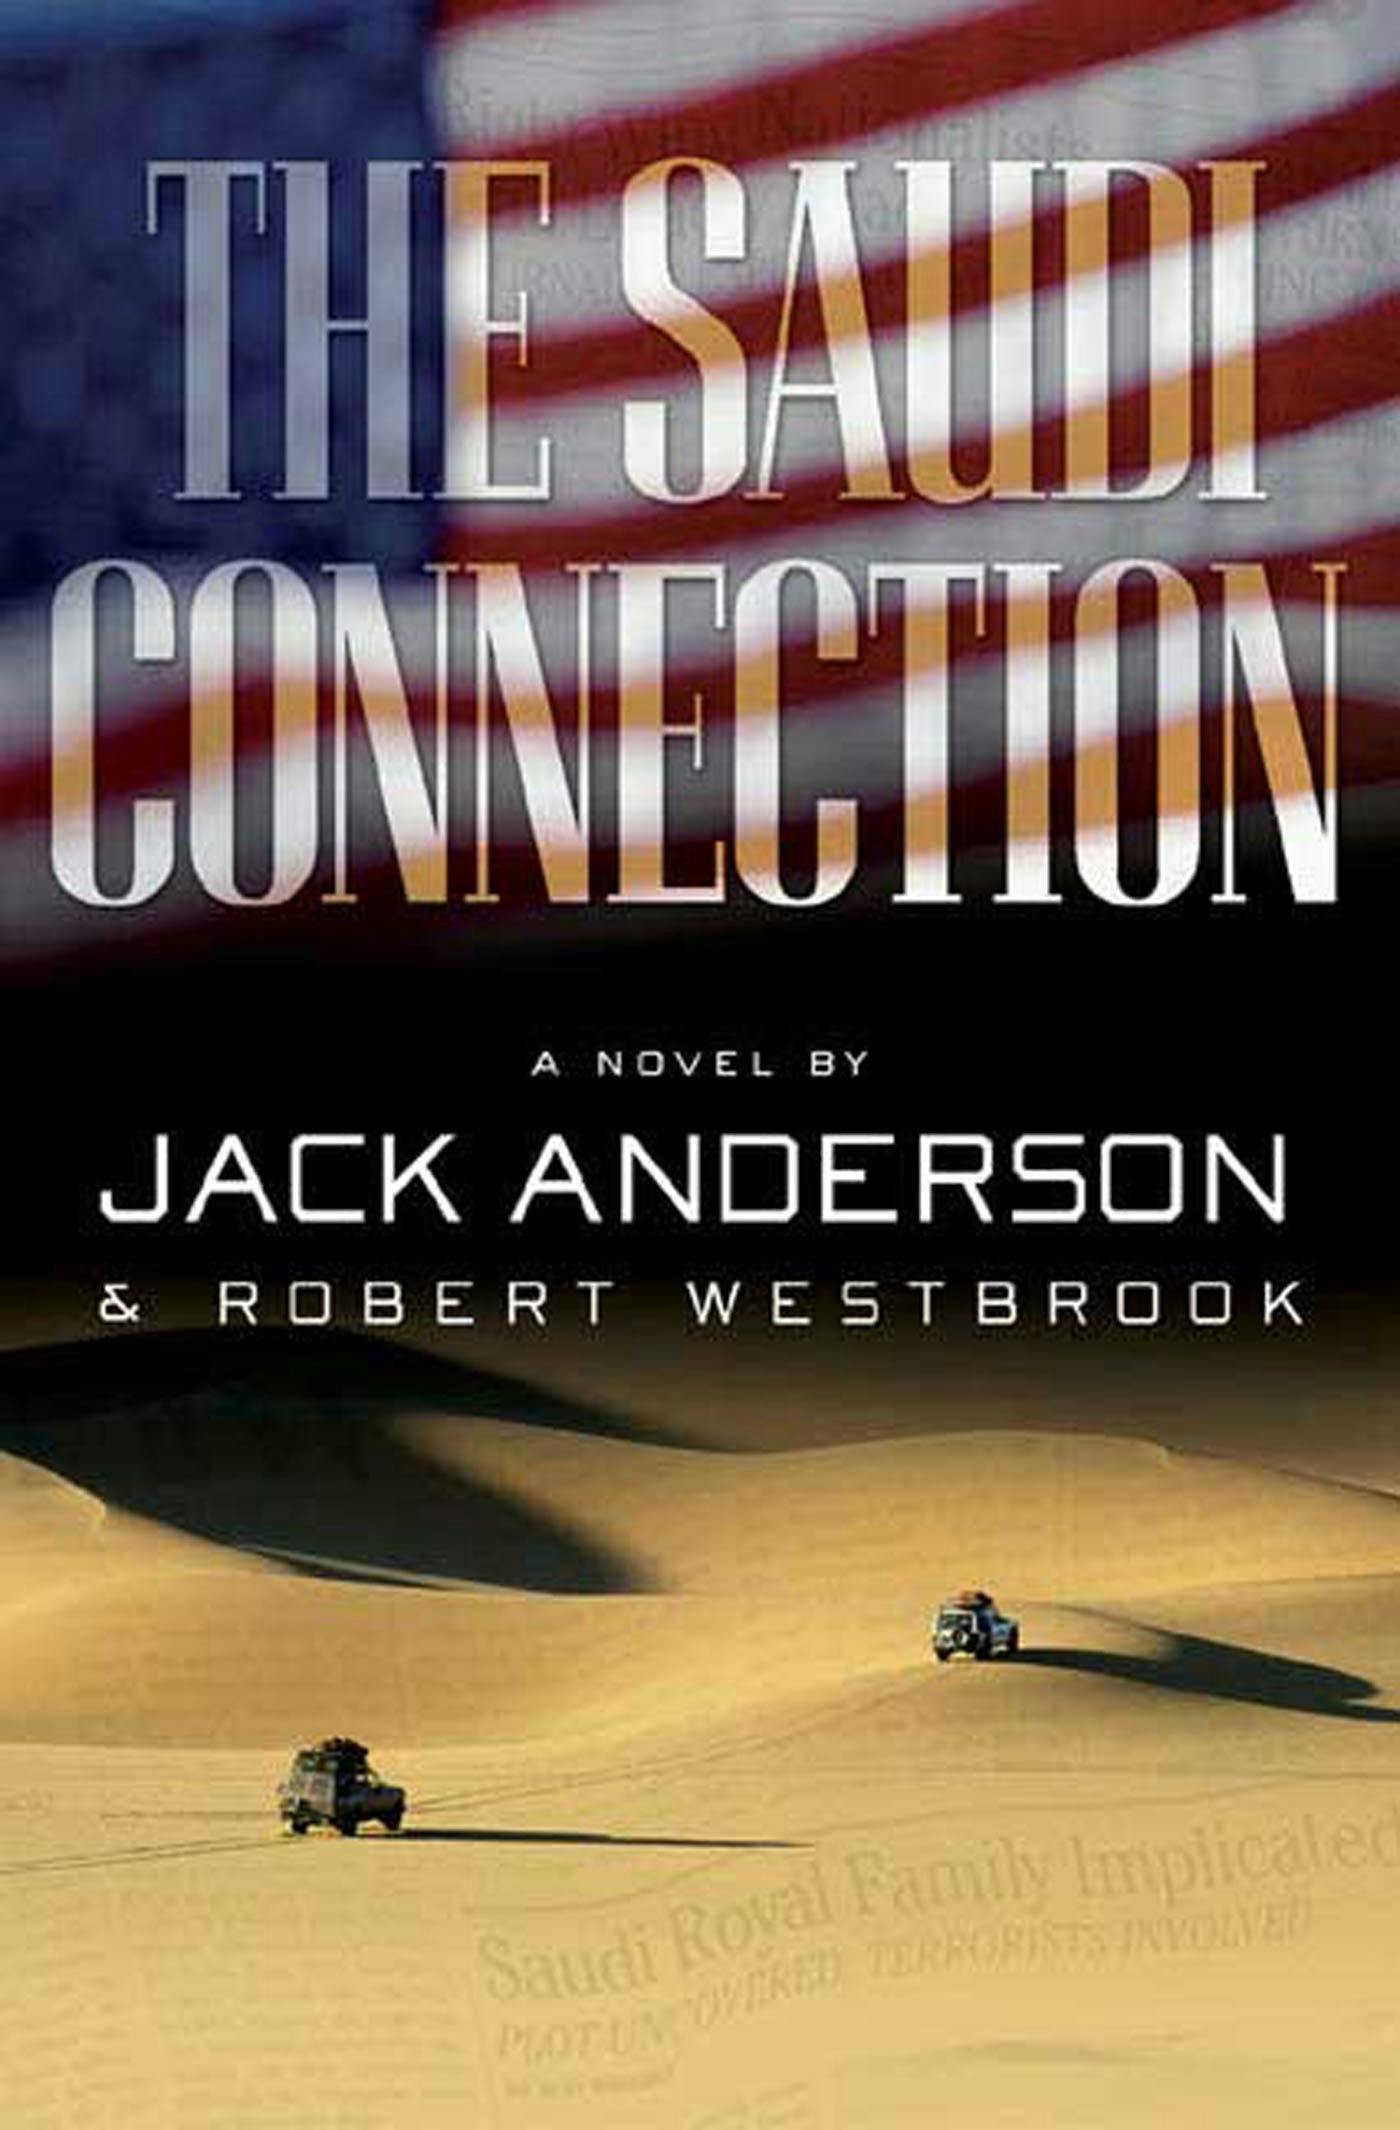 Cover for the book titled as: The Saudi Connection